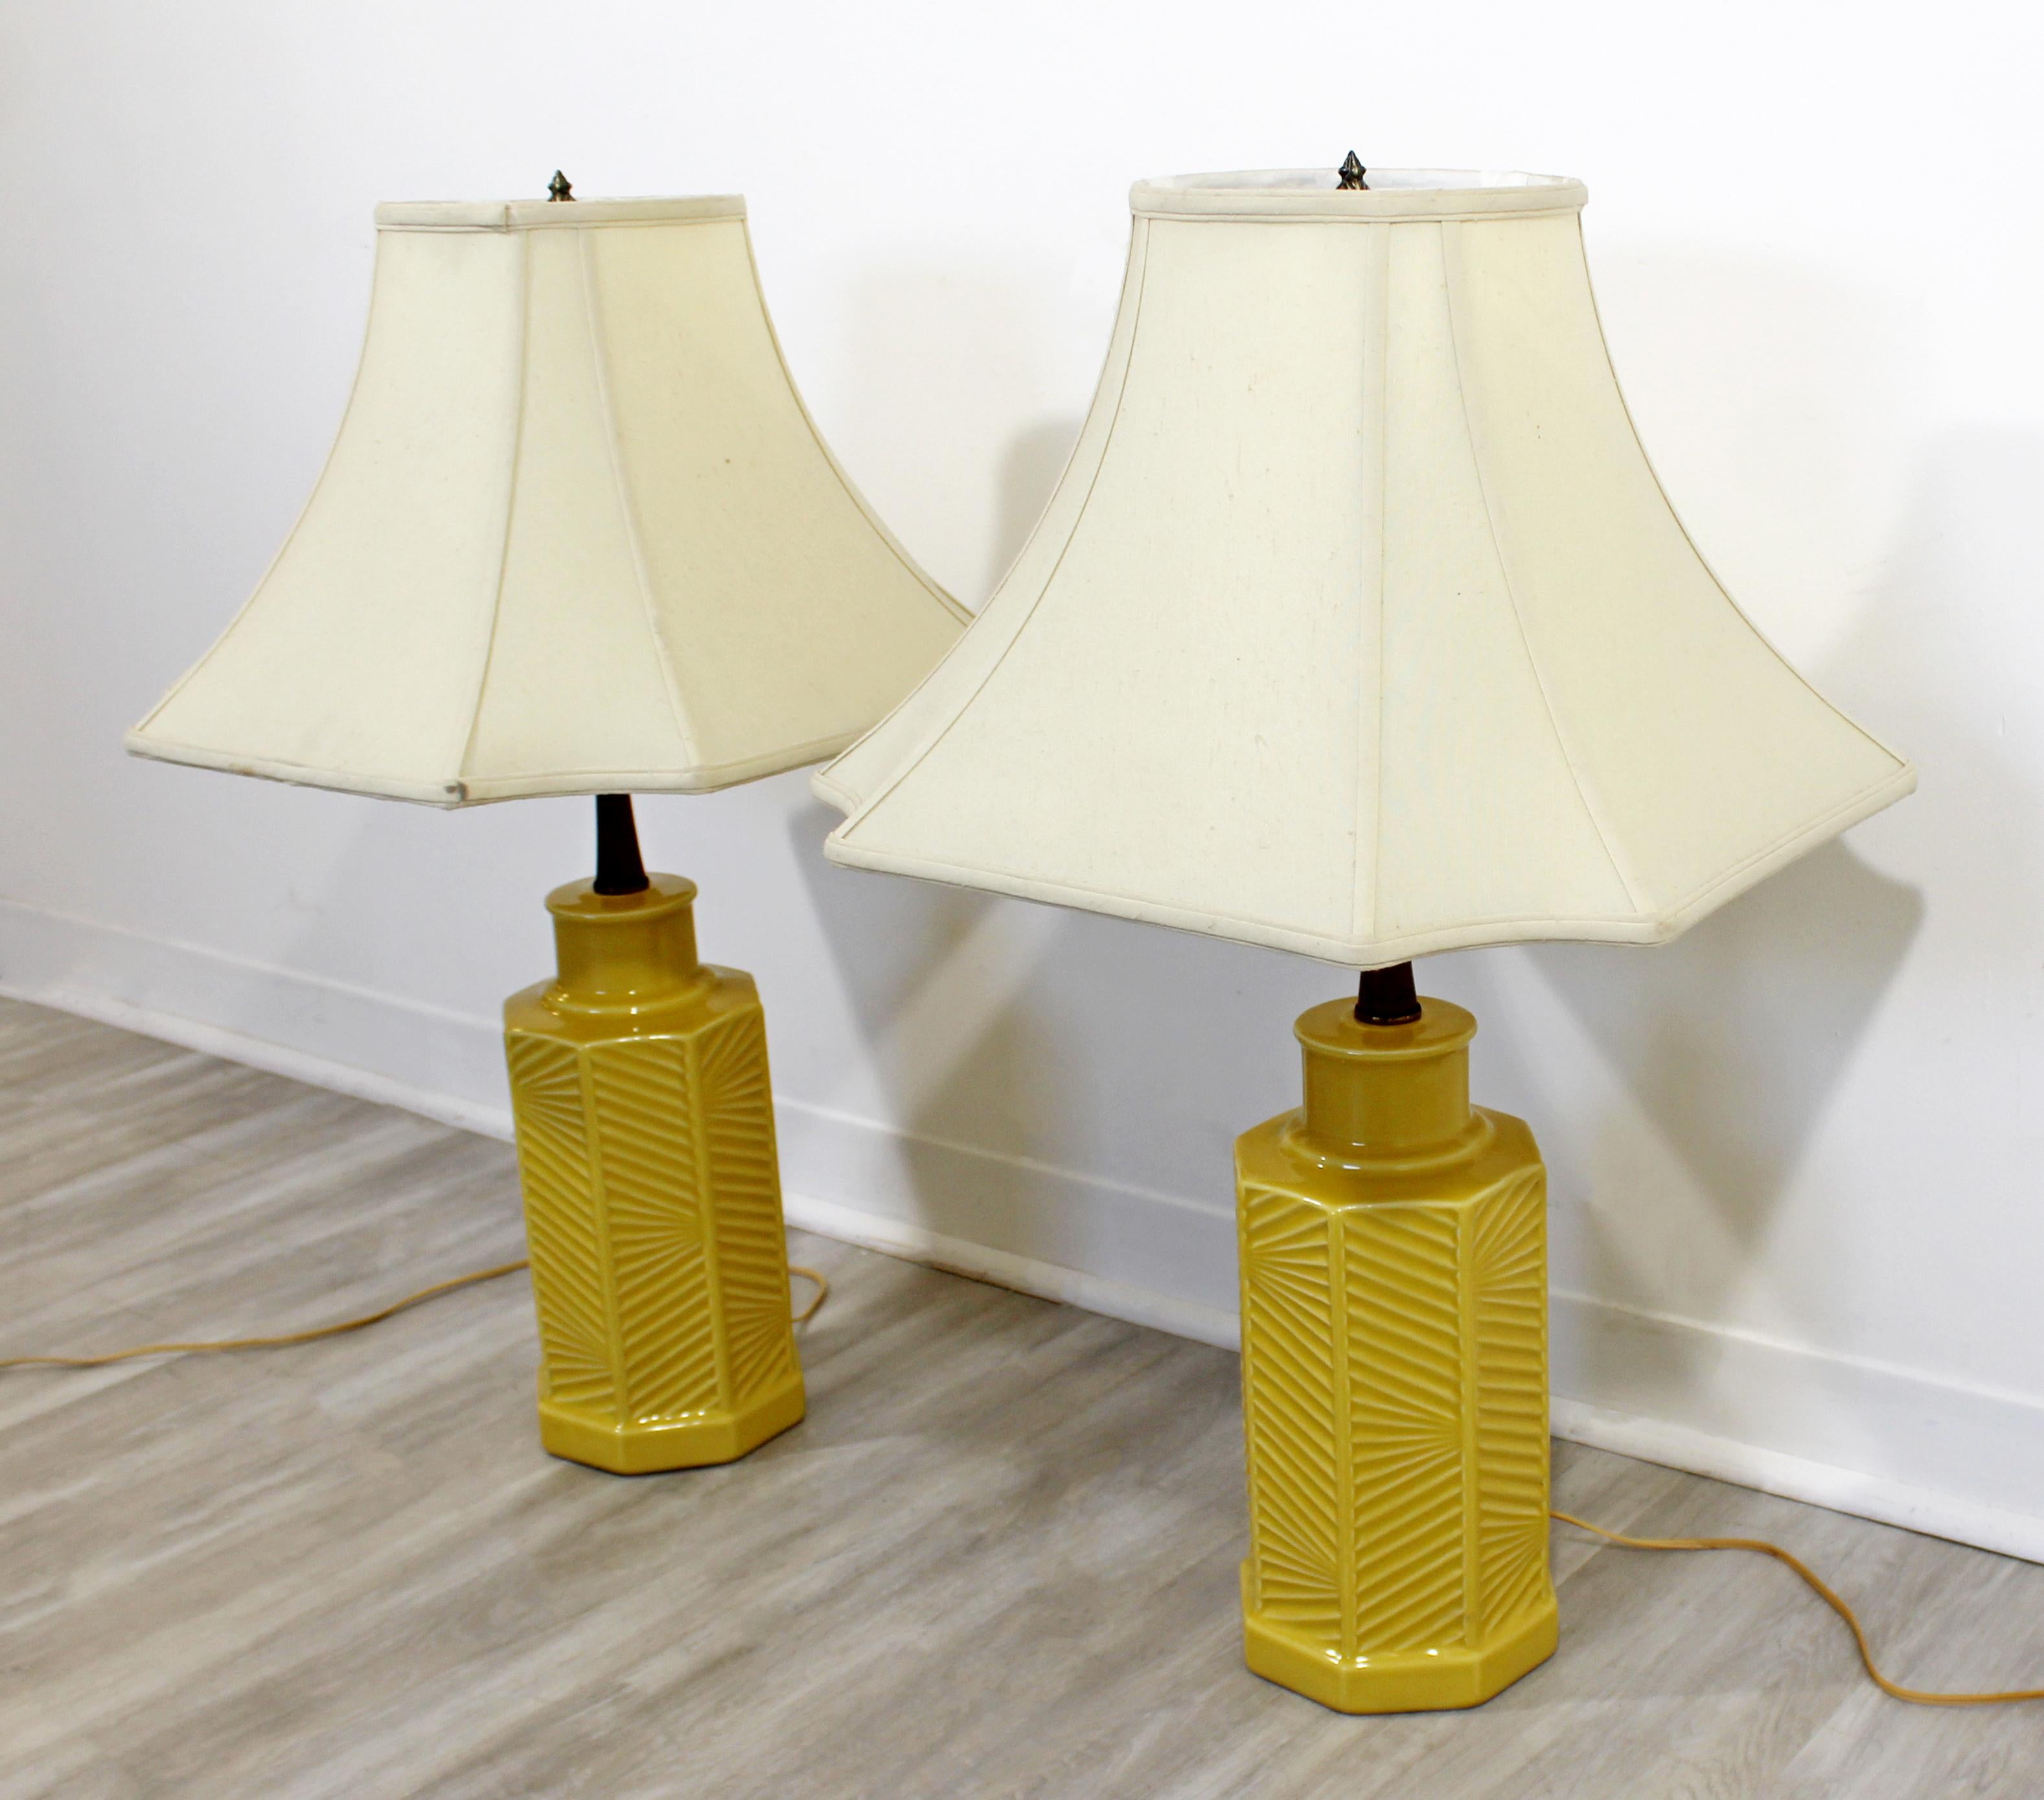 Late 20th Century Mid-Century Modern Pair of Chinoiserie Yellow Ceramic Table Lamps Asian Shades